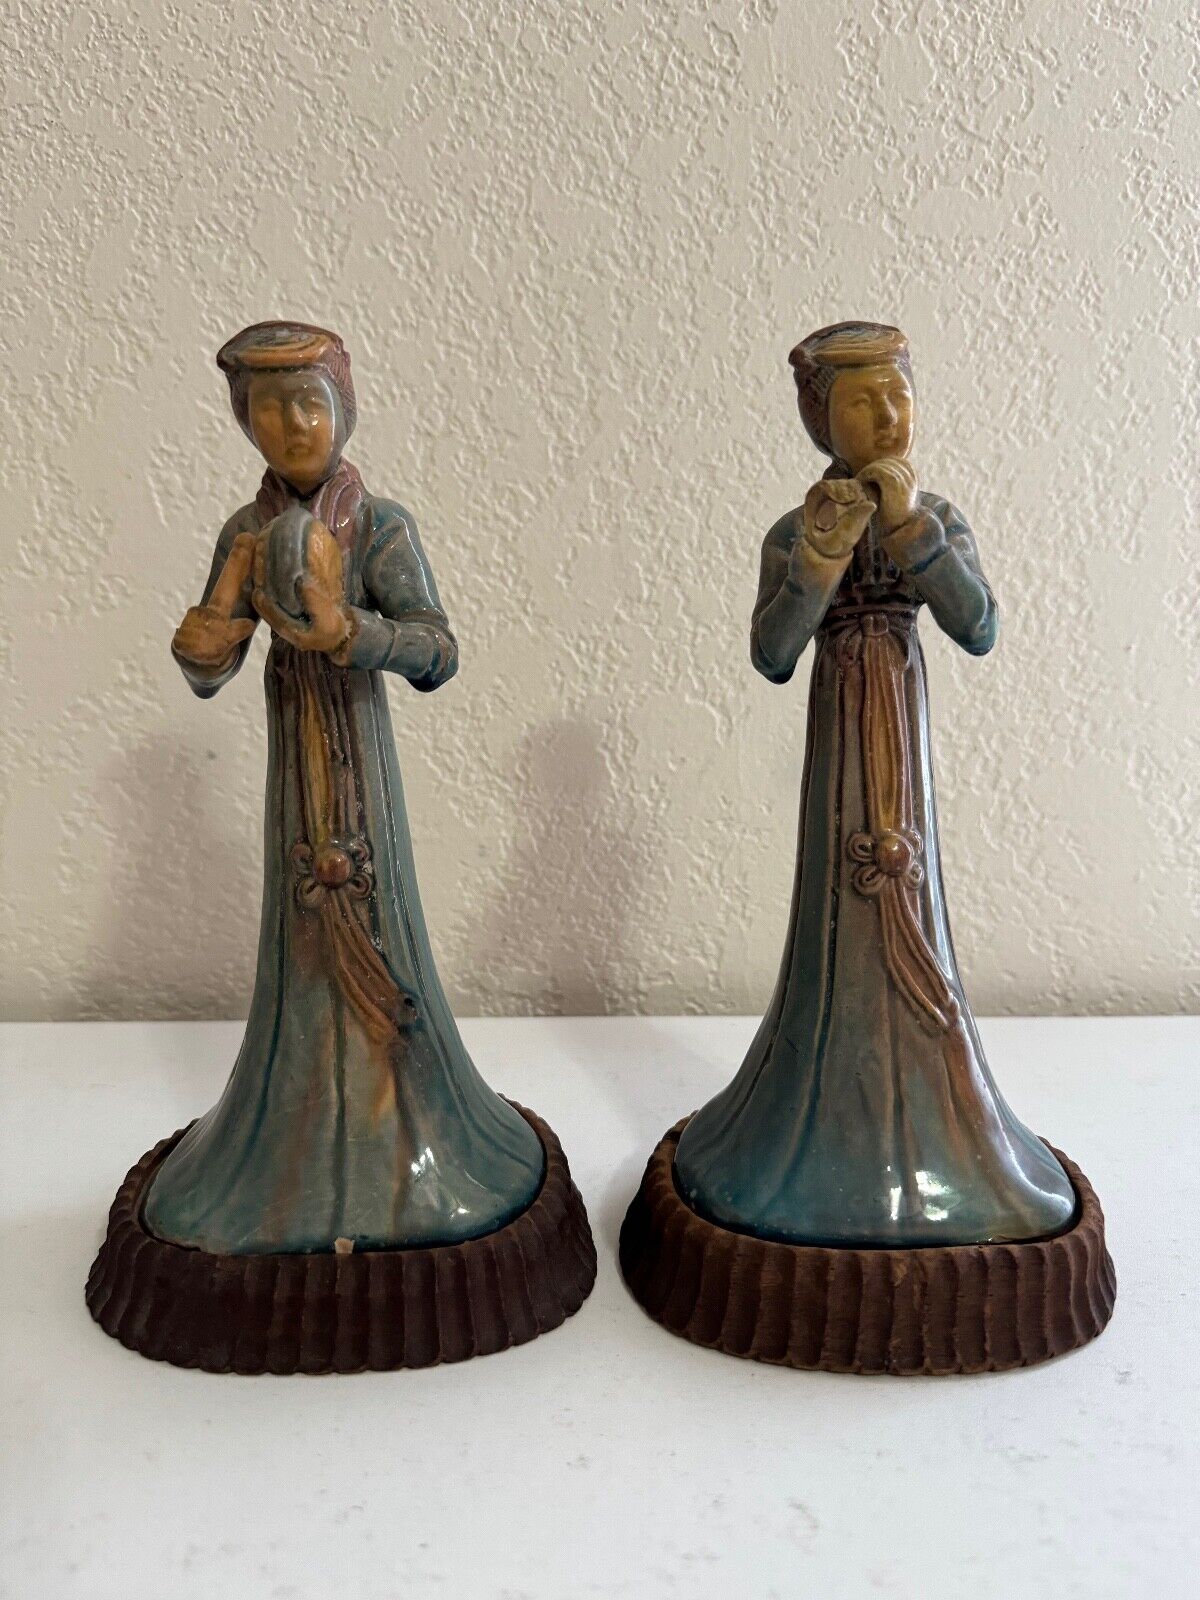 Antique Pair of Chinese Mudman Statues Figurines Lady Musicians w/ Wood Stands